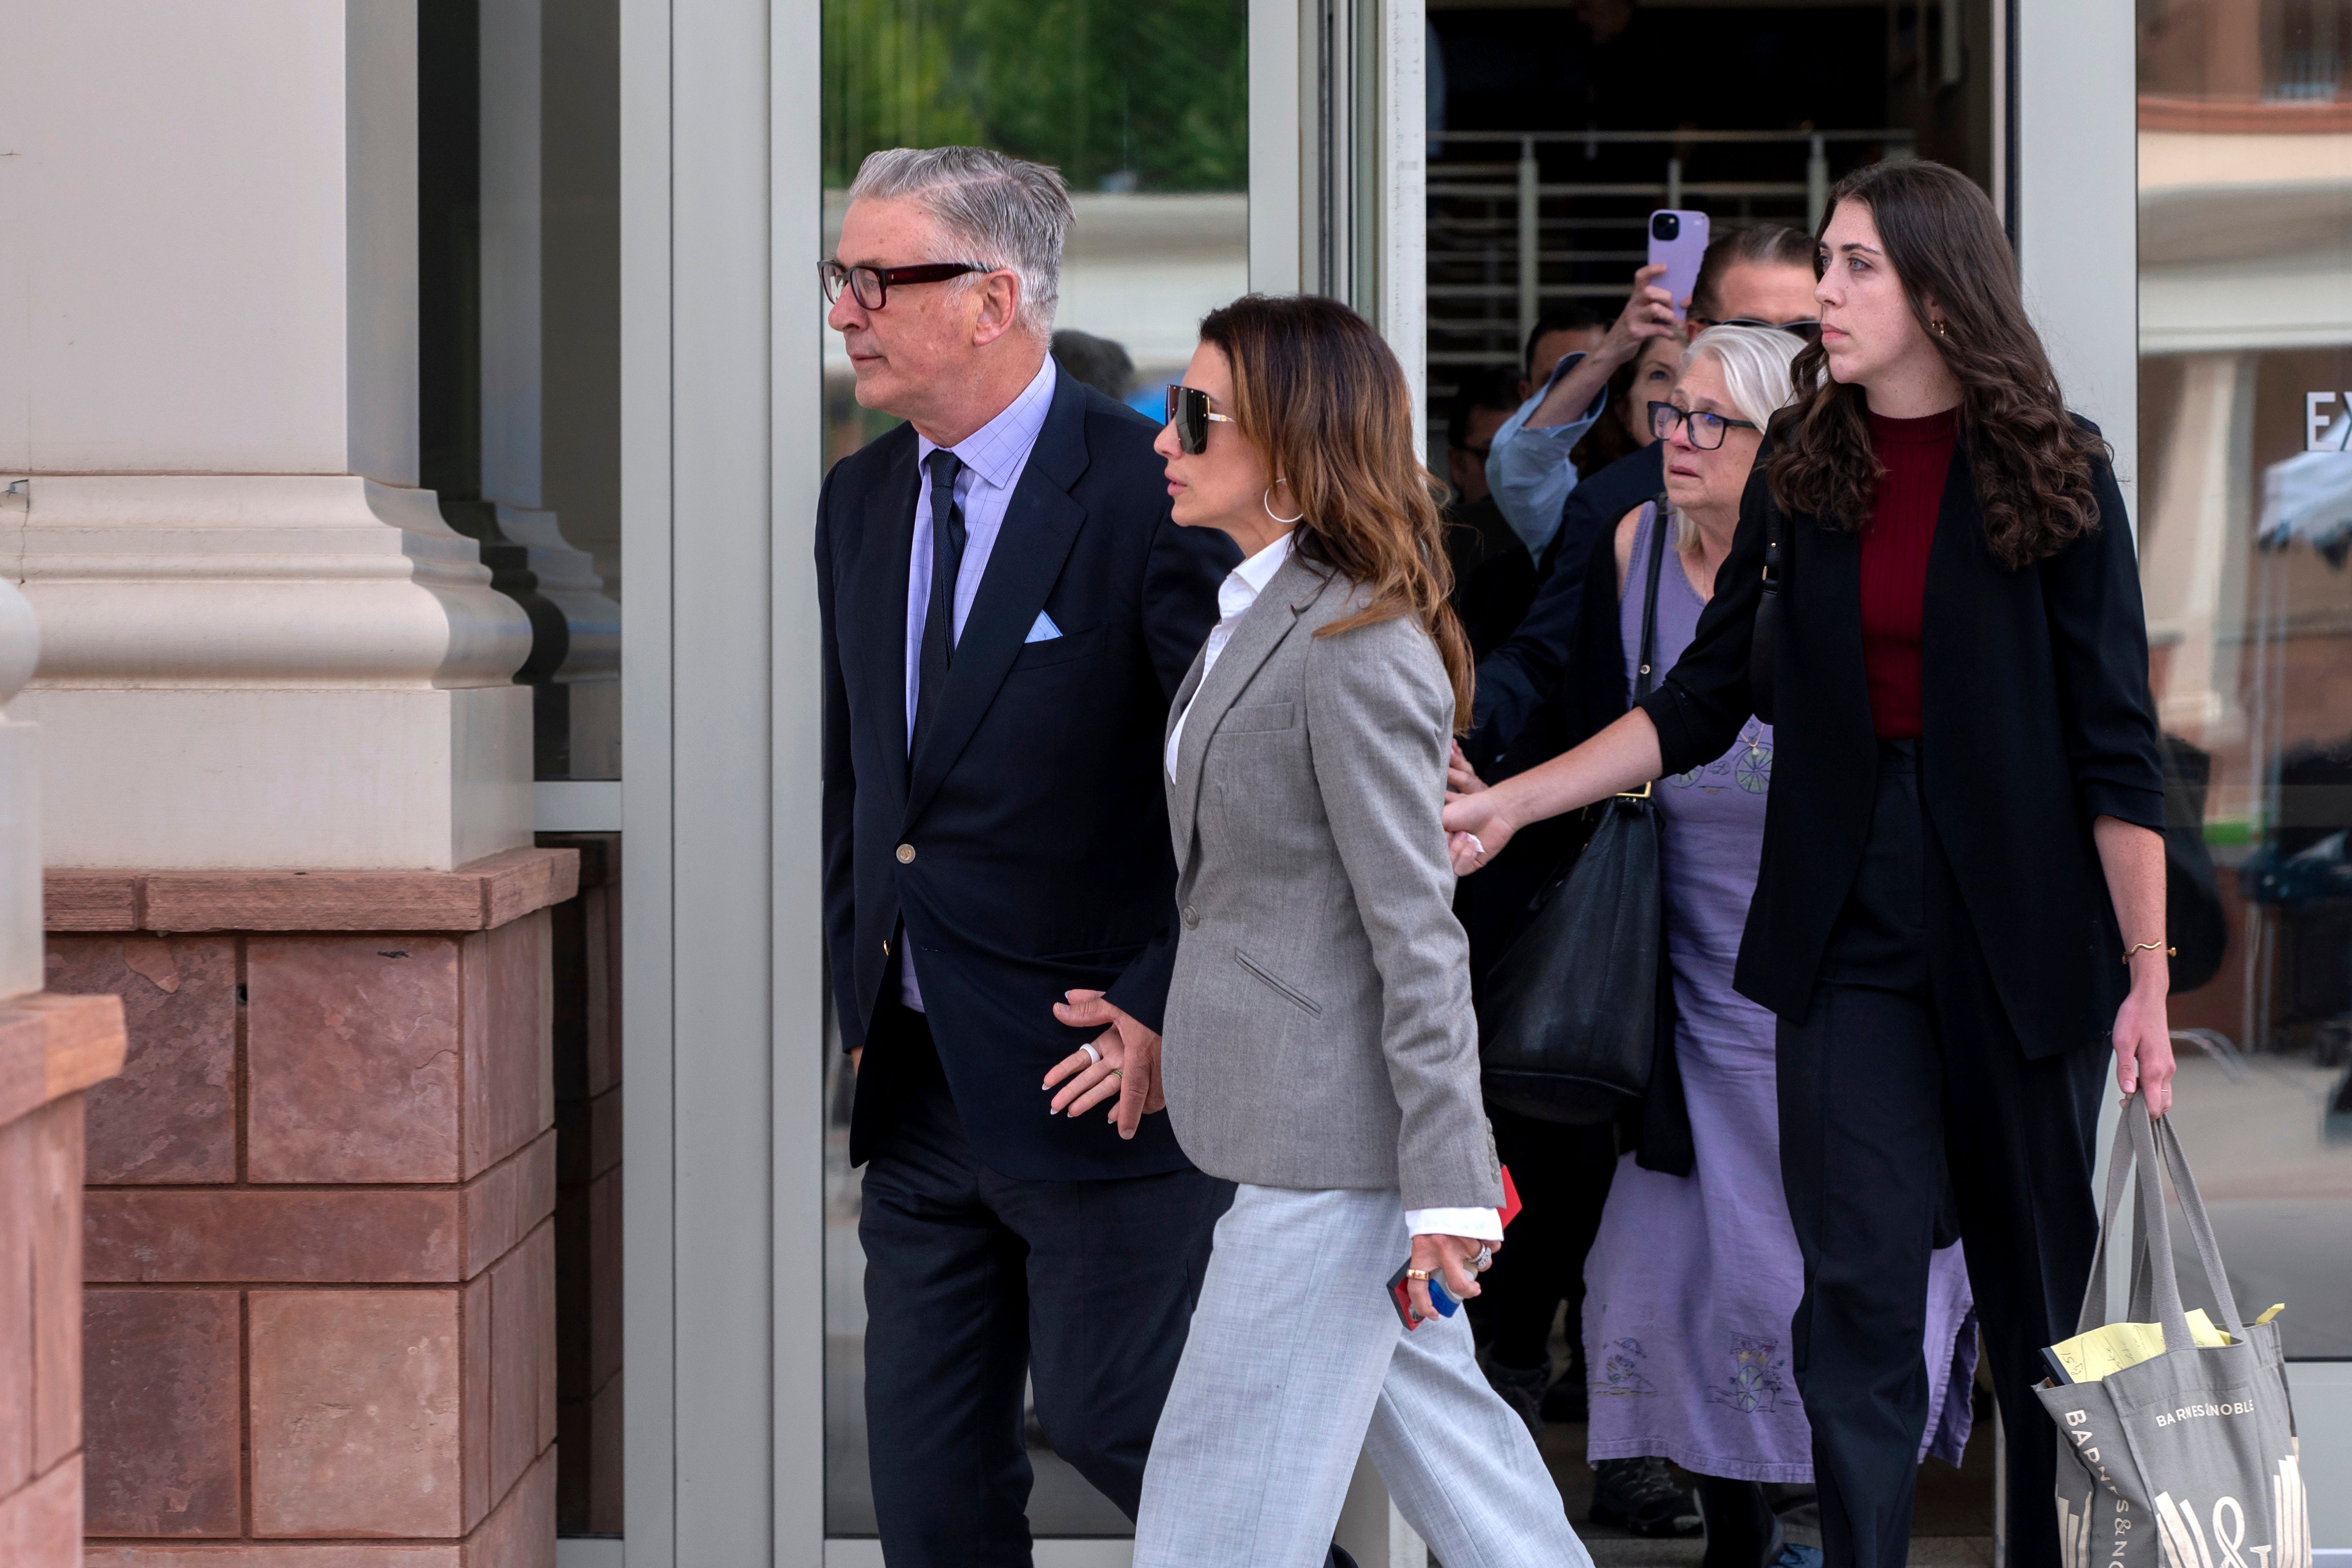 Members of Baldwin’s family, including his wife Hilaria Baldwin (pictured) accompanied him to court throughout proceedings